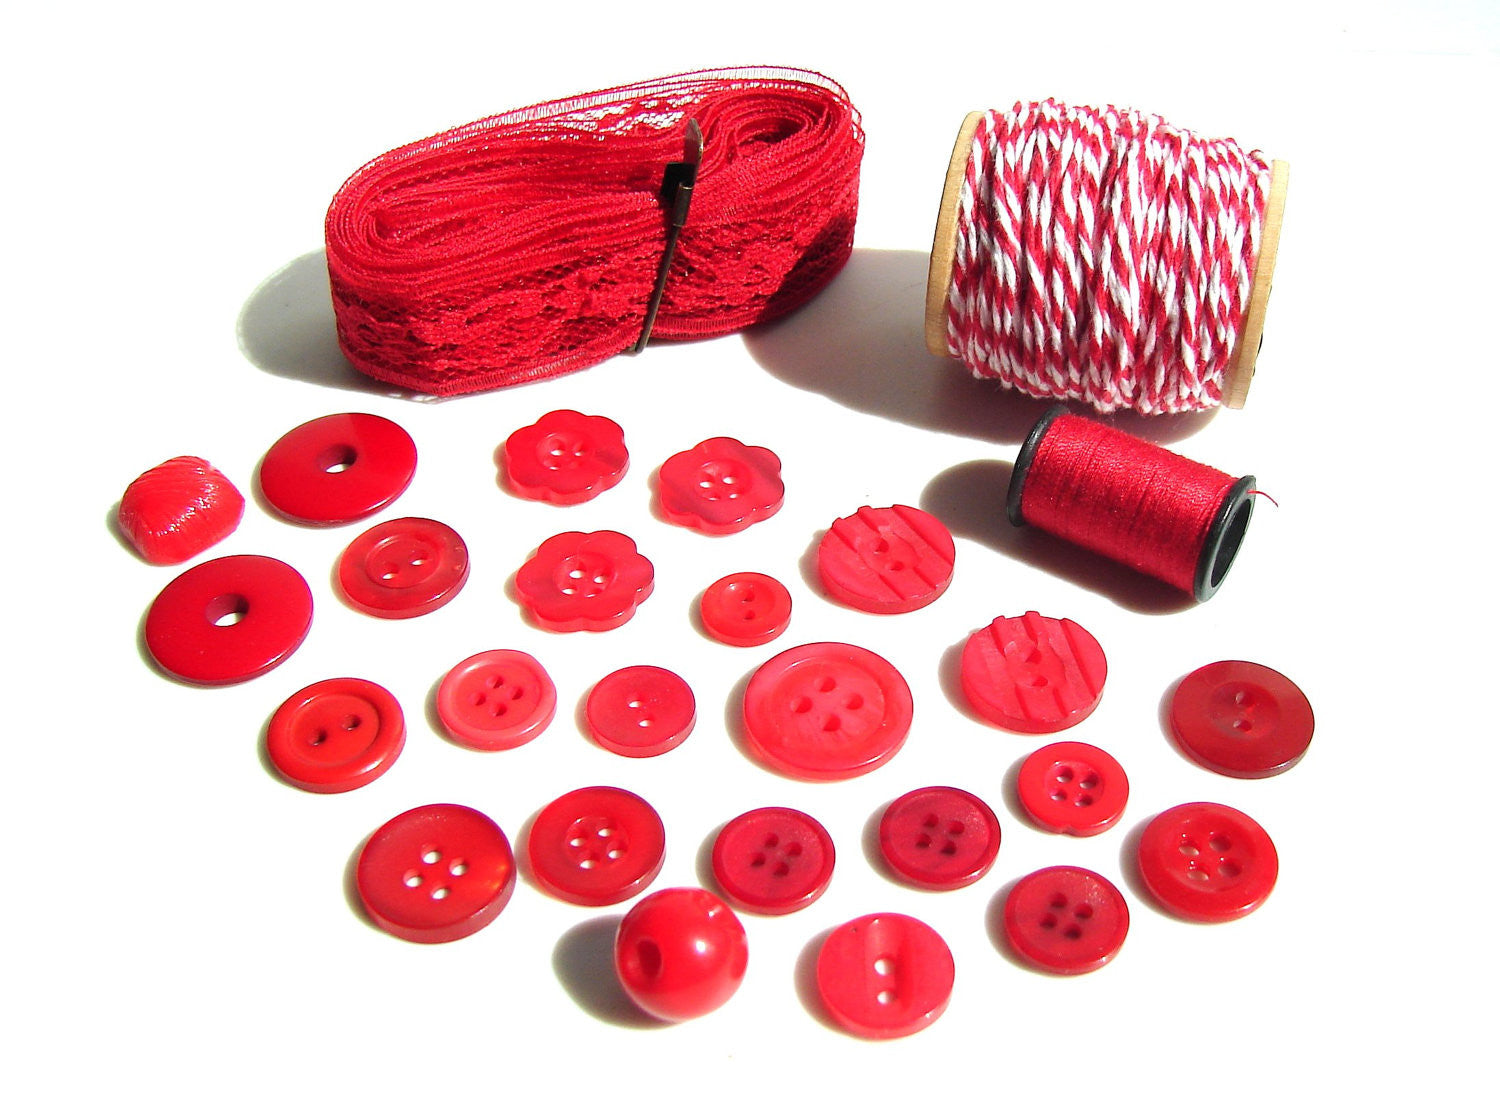 Huge Vintage Sewing Kit - Thread, Buttons, Pins and More